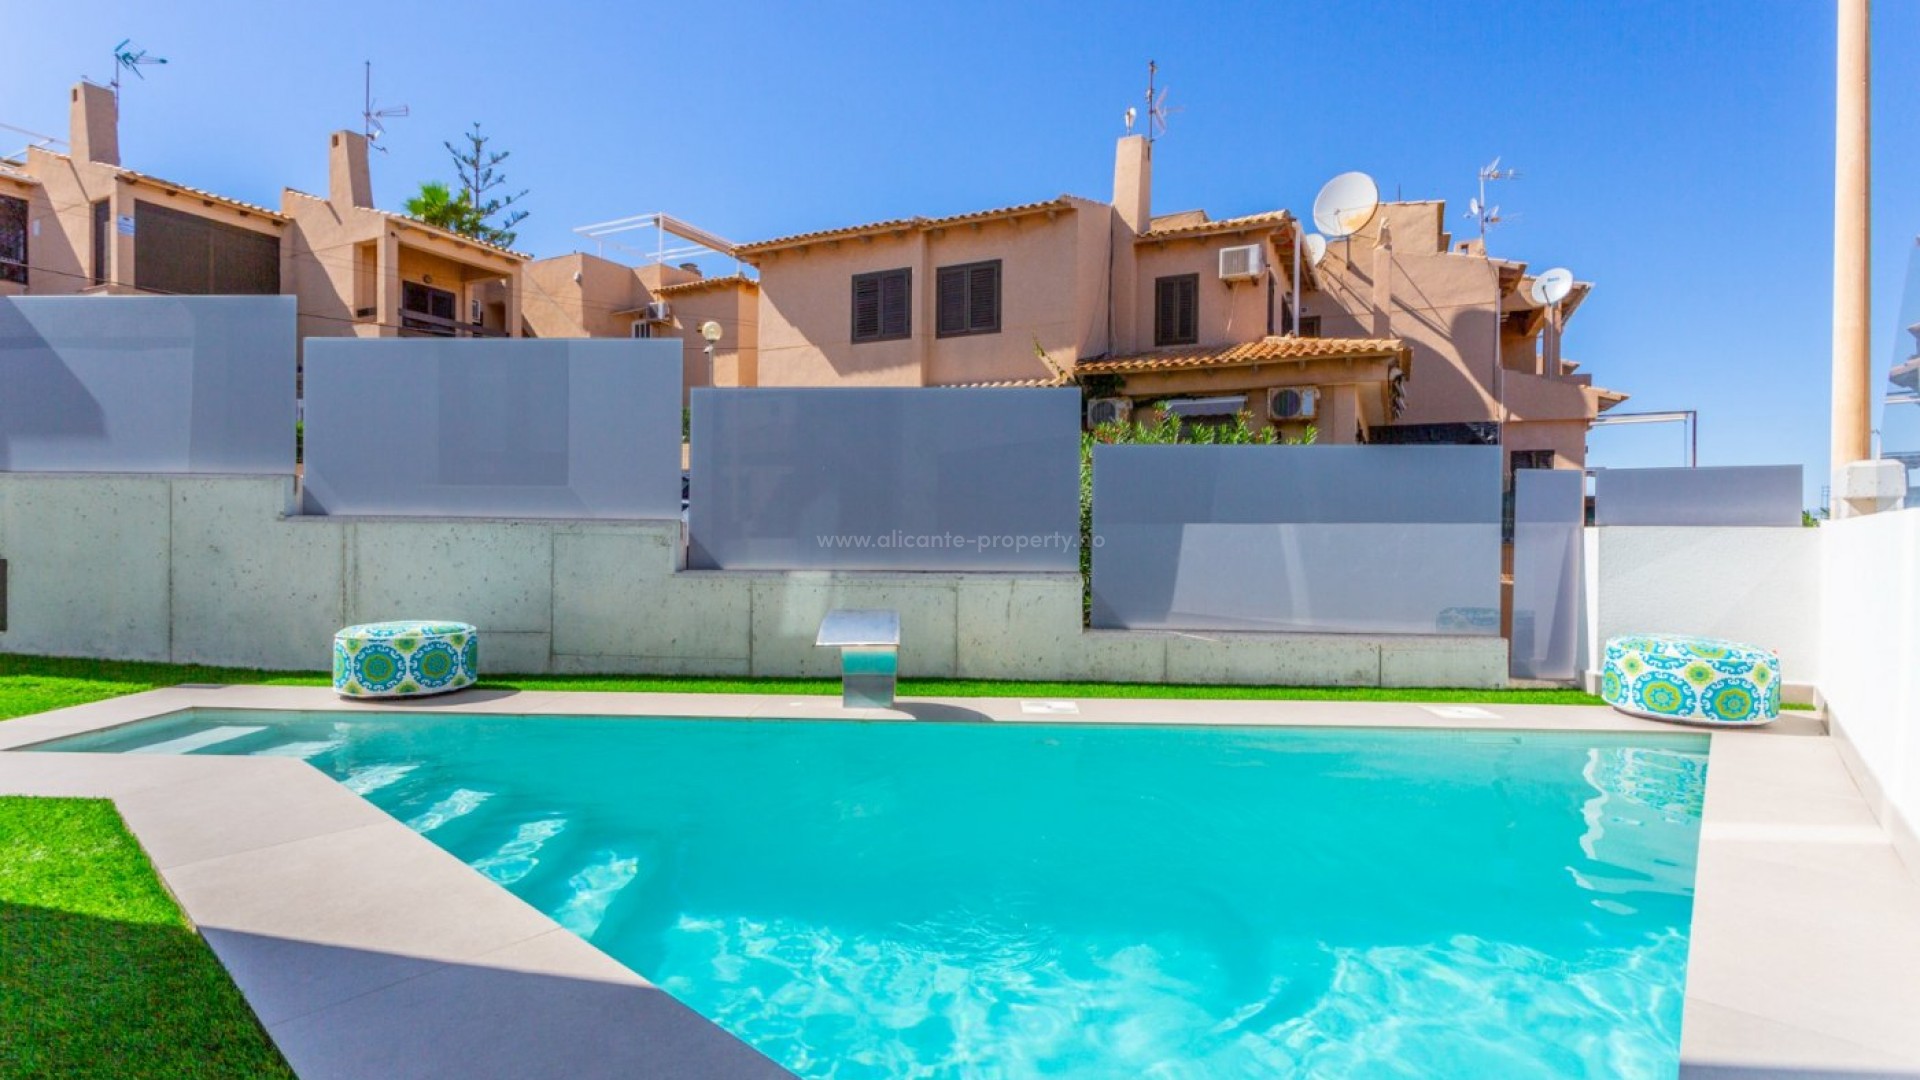 Villa/house on La Mata beach in Torrevieja, 3 bedrooms, 4 bathrooms, saltwater pool, terrace, solarium with hot tub and bar counter, finished half-basement